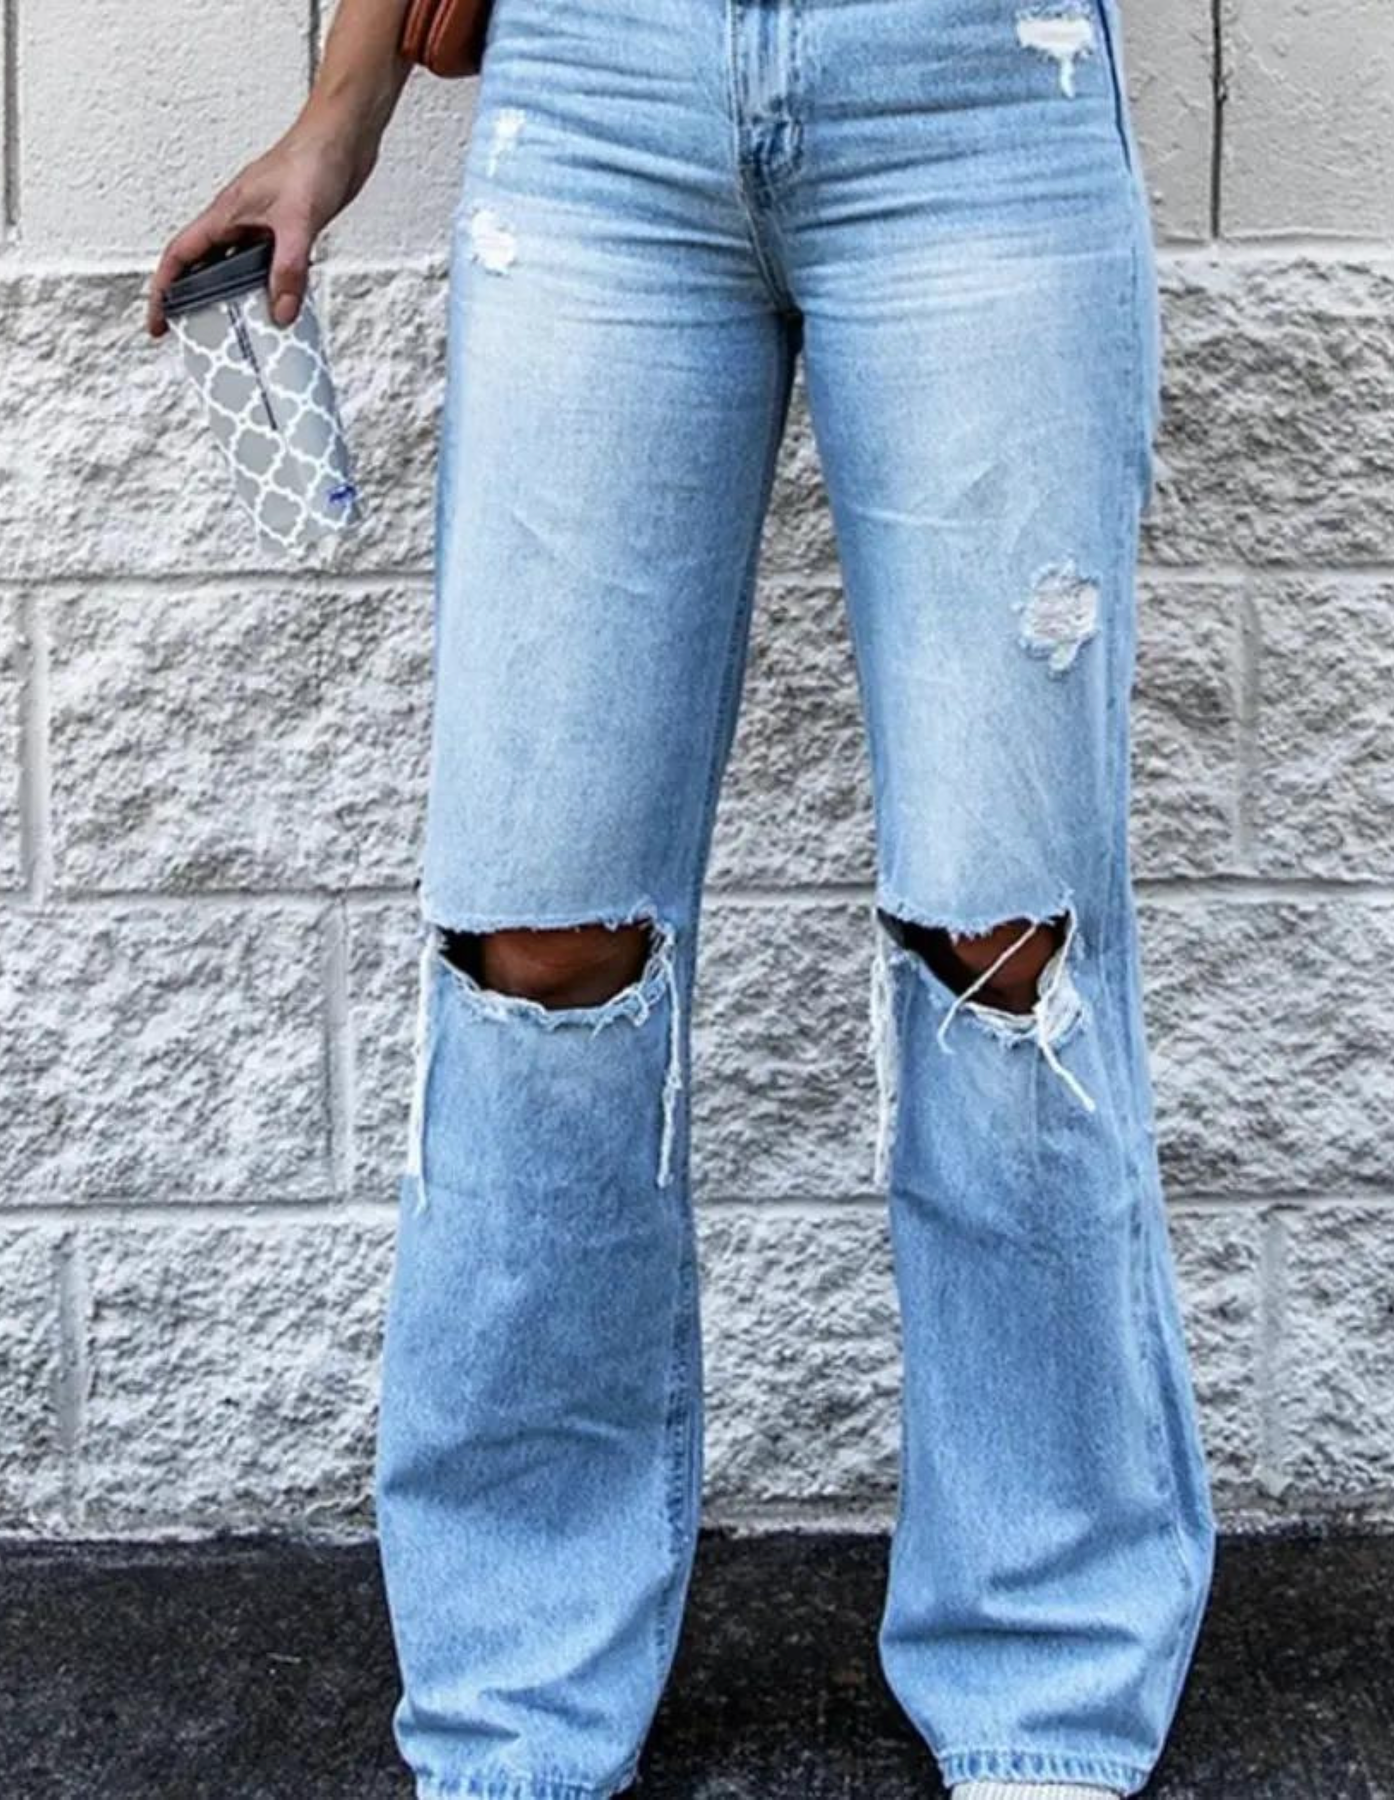 Denim wide leg jeans with holes in each knee